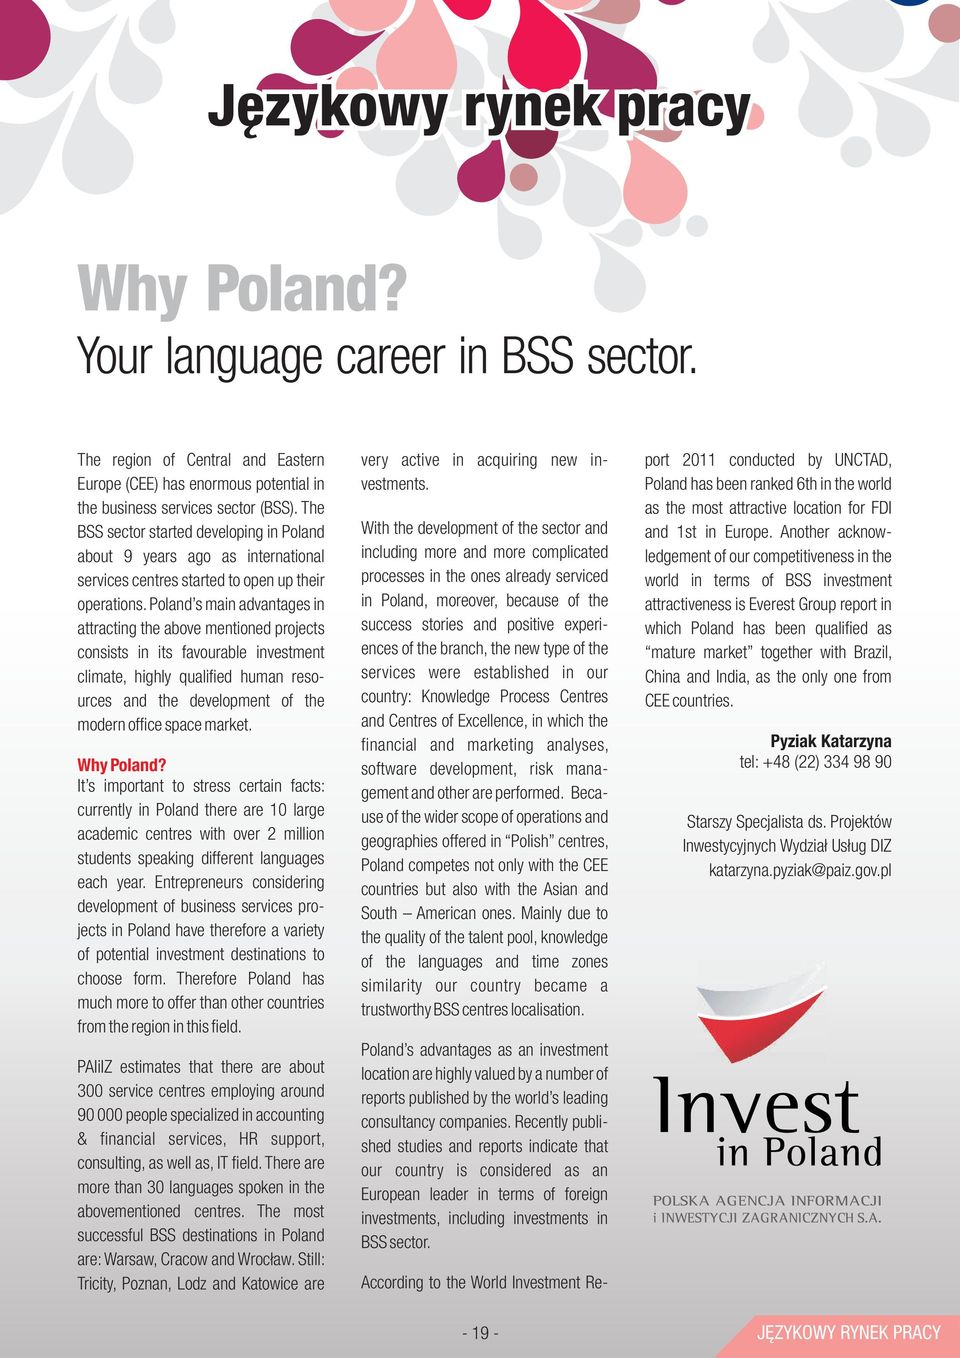 Poland has been ranked 6th in the world the business services sector (BSS).